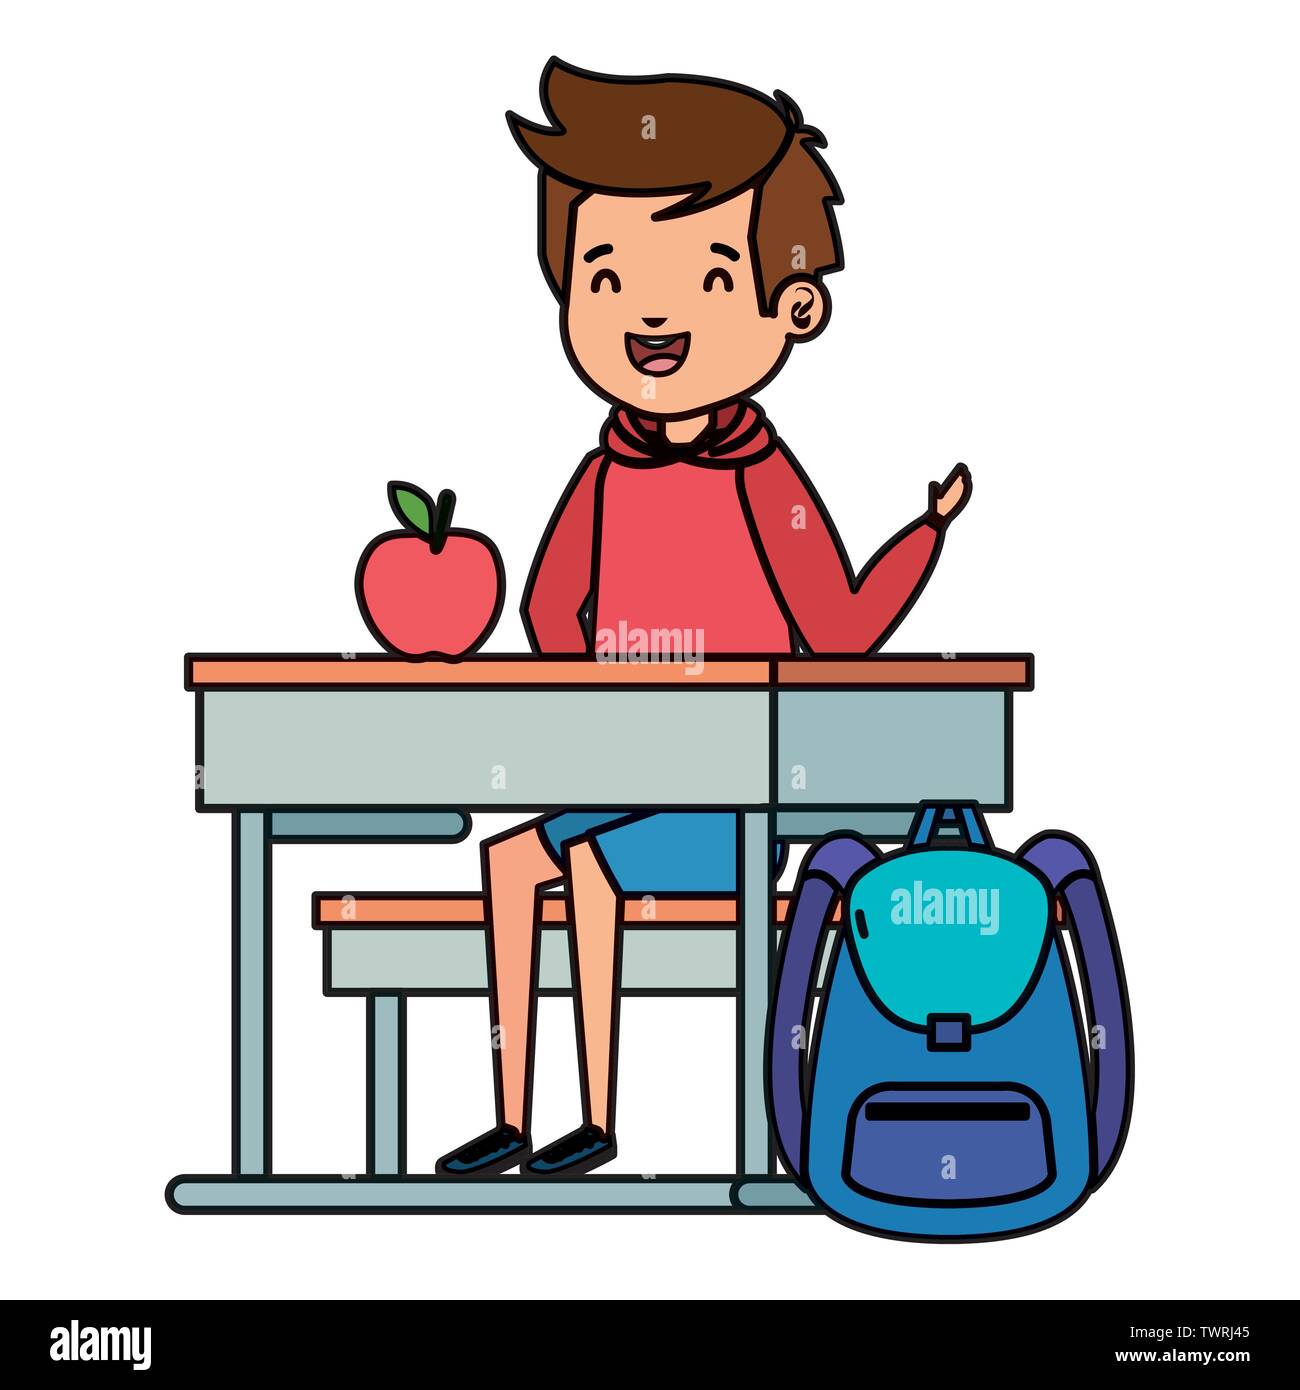 Student Boy Seated In School Desk With Apple And Bag Stock Vector